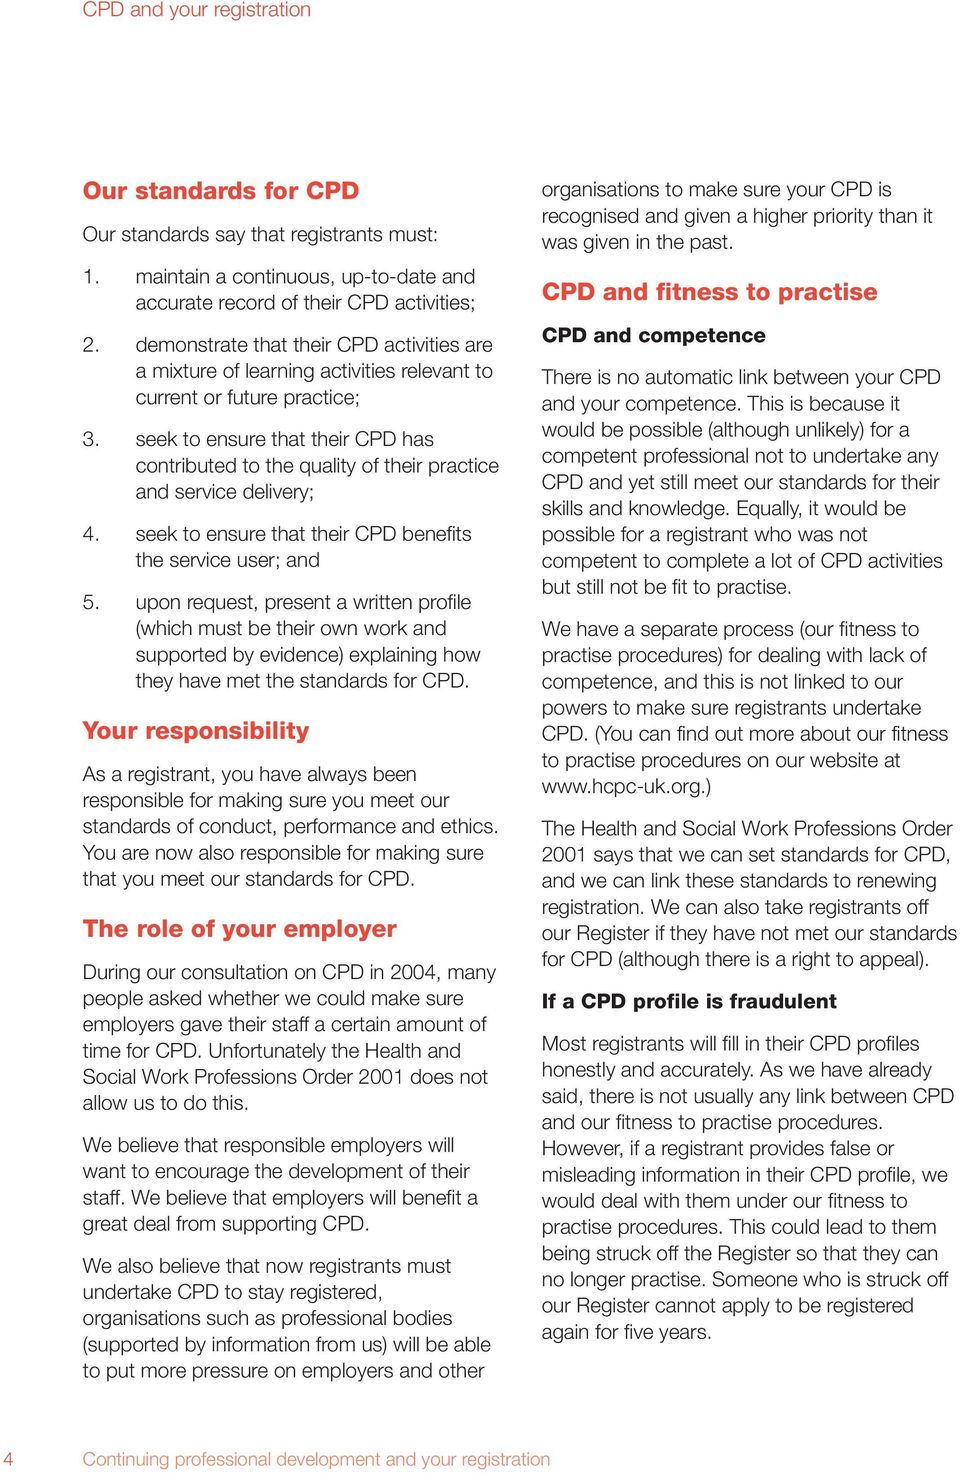 seek to ensure that their CPD has contributed to the quality of their practice and service delivery; 4. seek to ensure that their CPD benefits the service user; and 5.